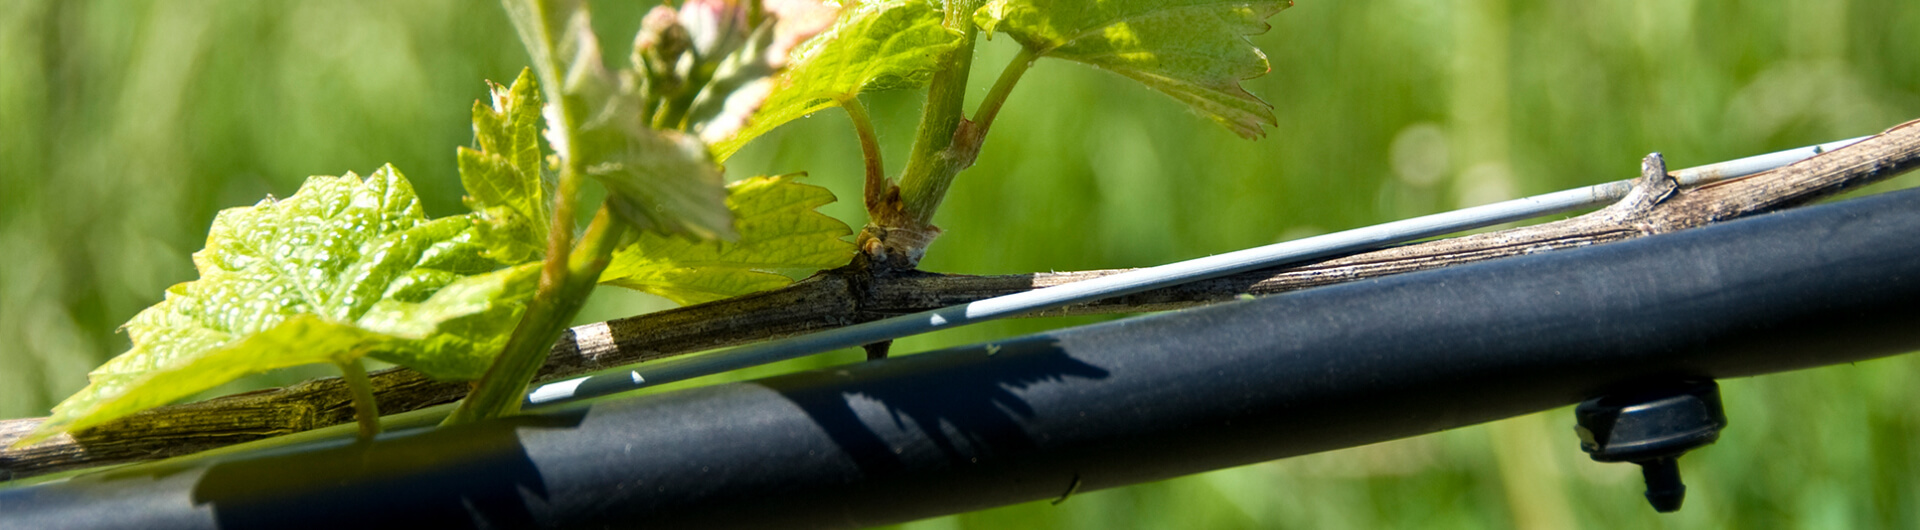 The branch of grape tree with its support.